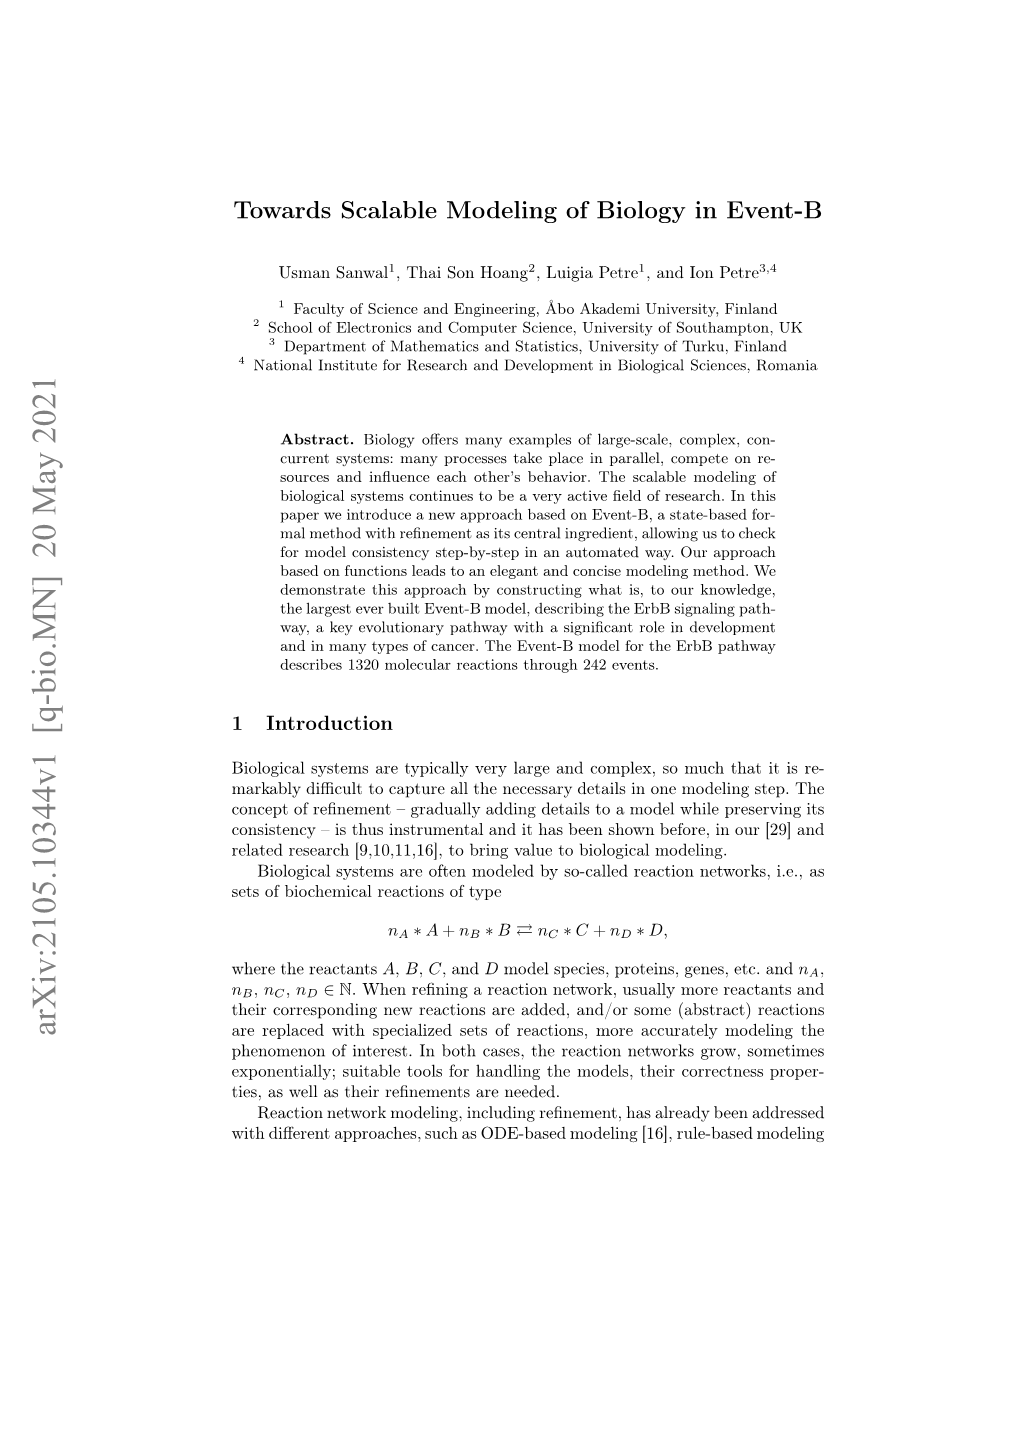 Towards Scalable Modeling of Biology in Event-B 3